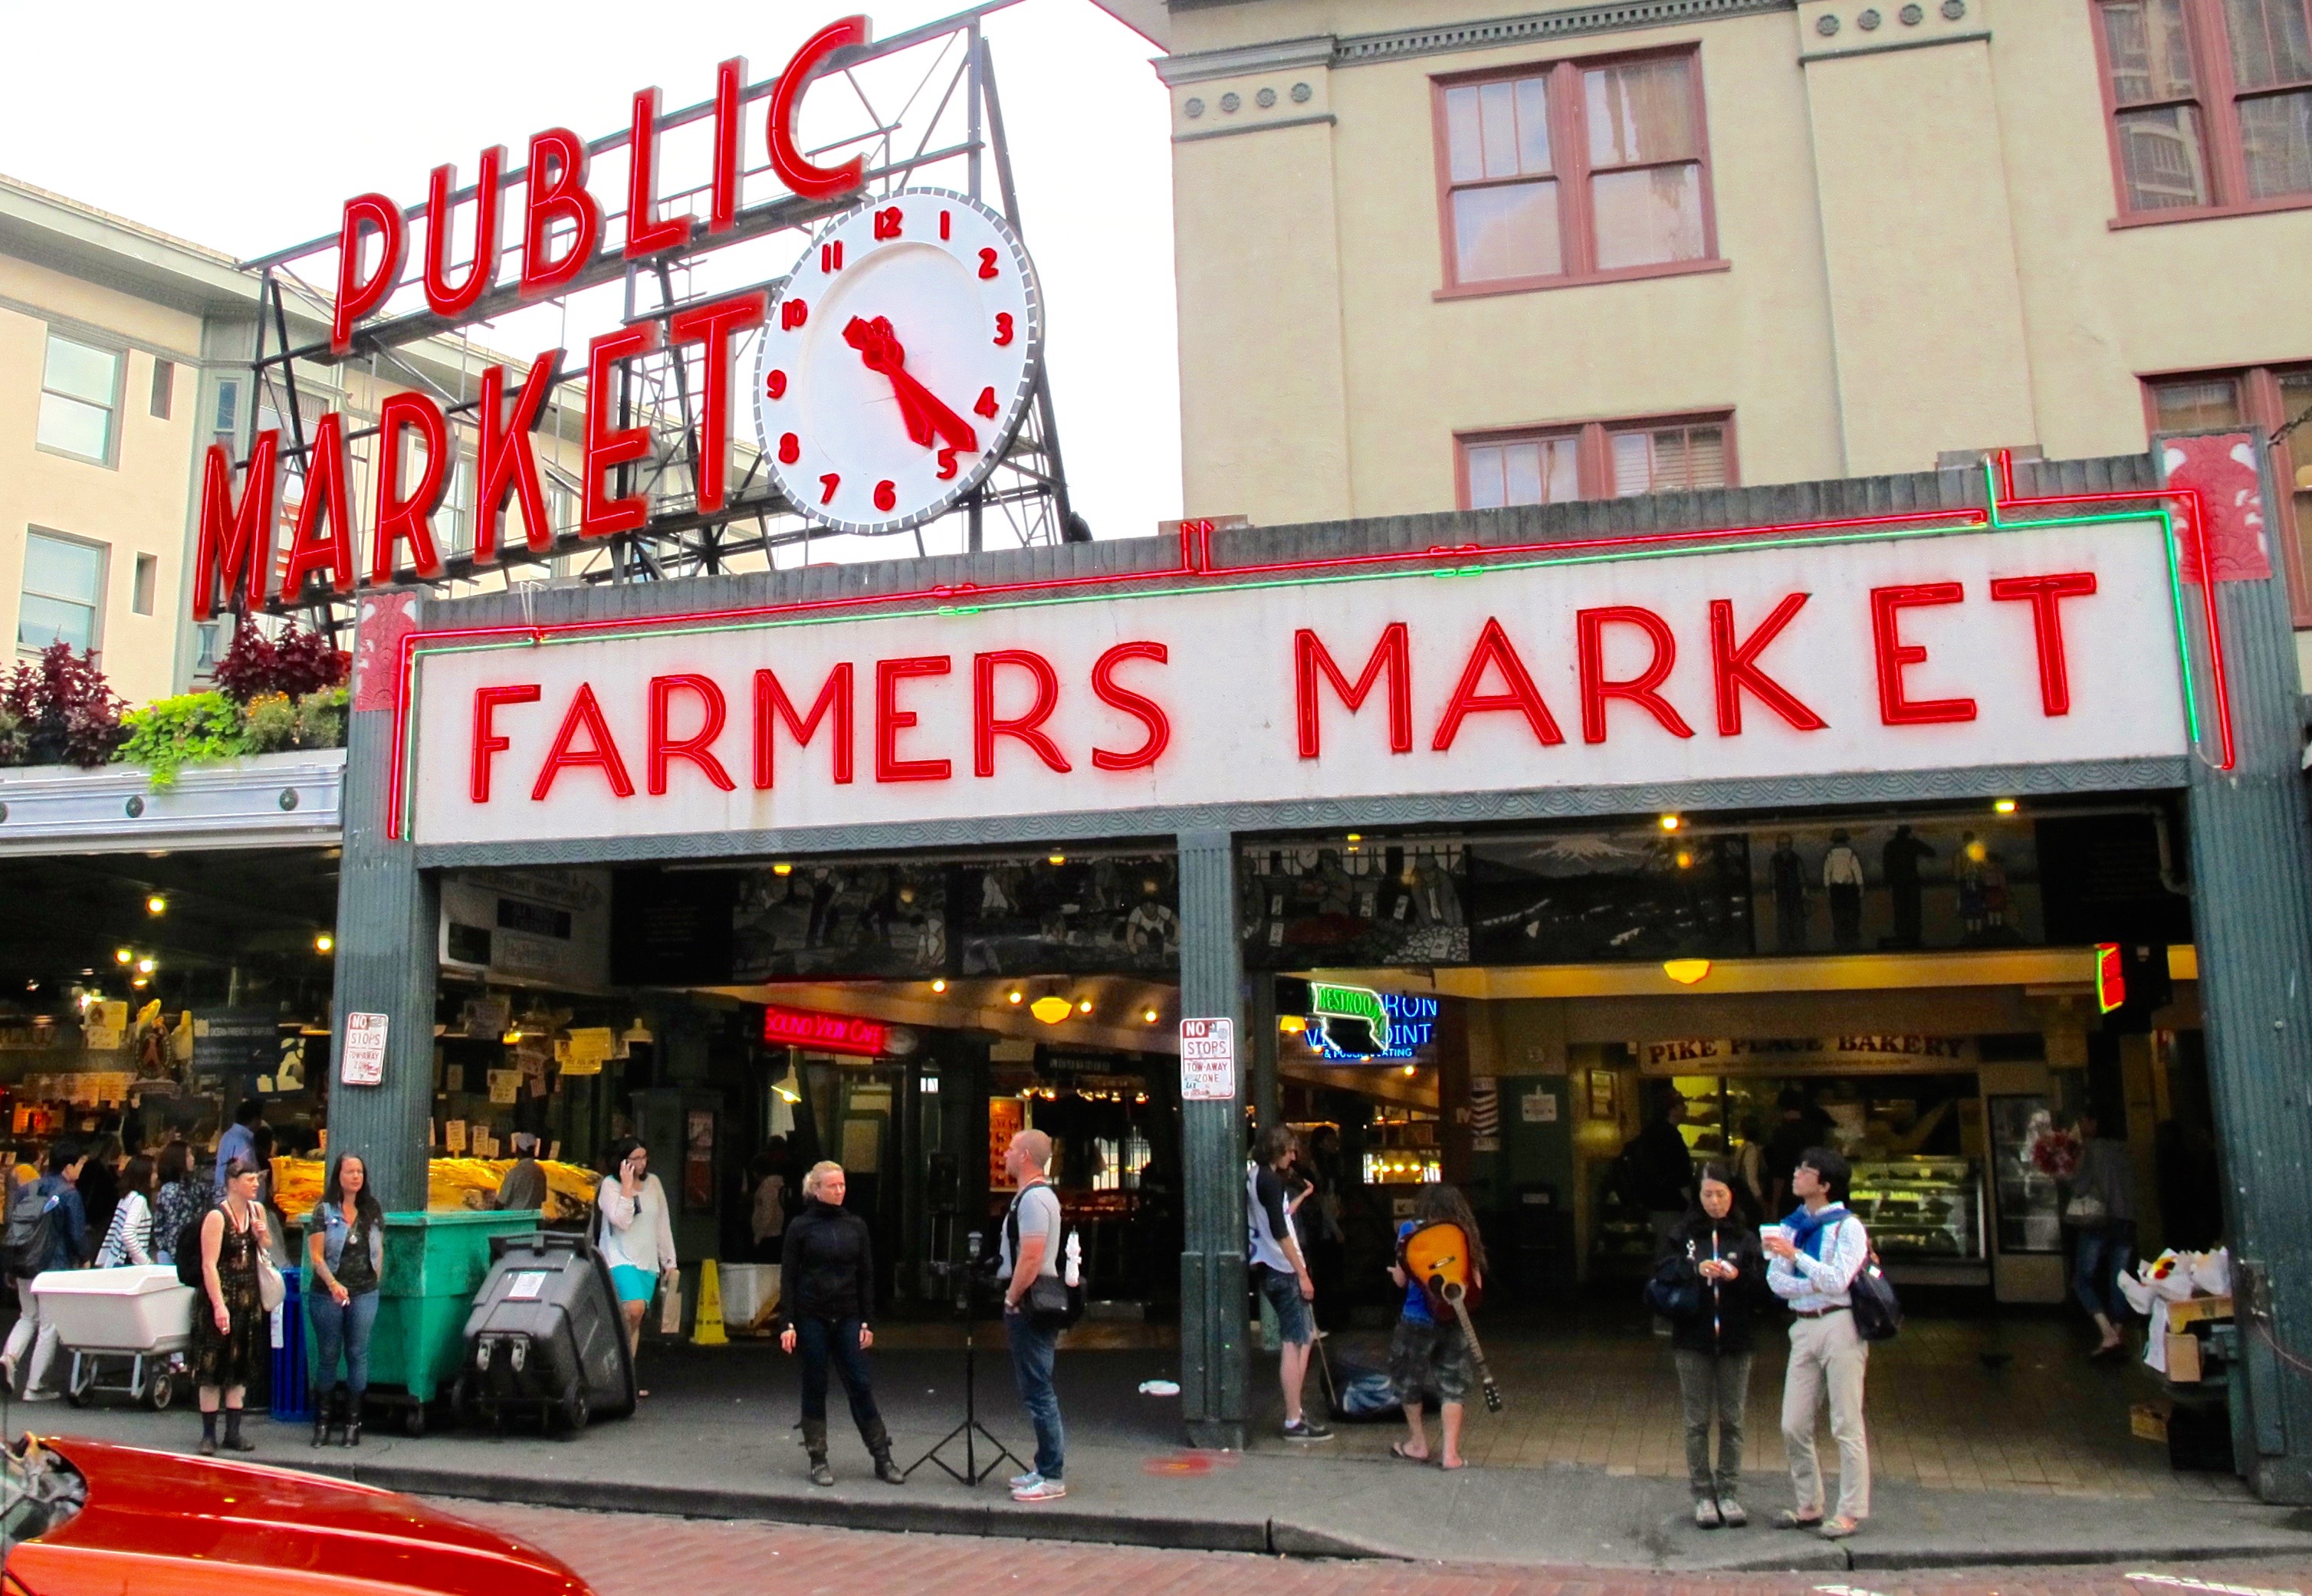 Pike Place Market spreads over 9 acres and features more than 70 eateries. Photo by Marla Norman. 